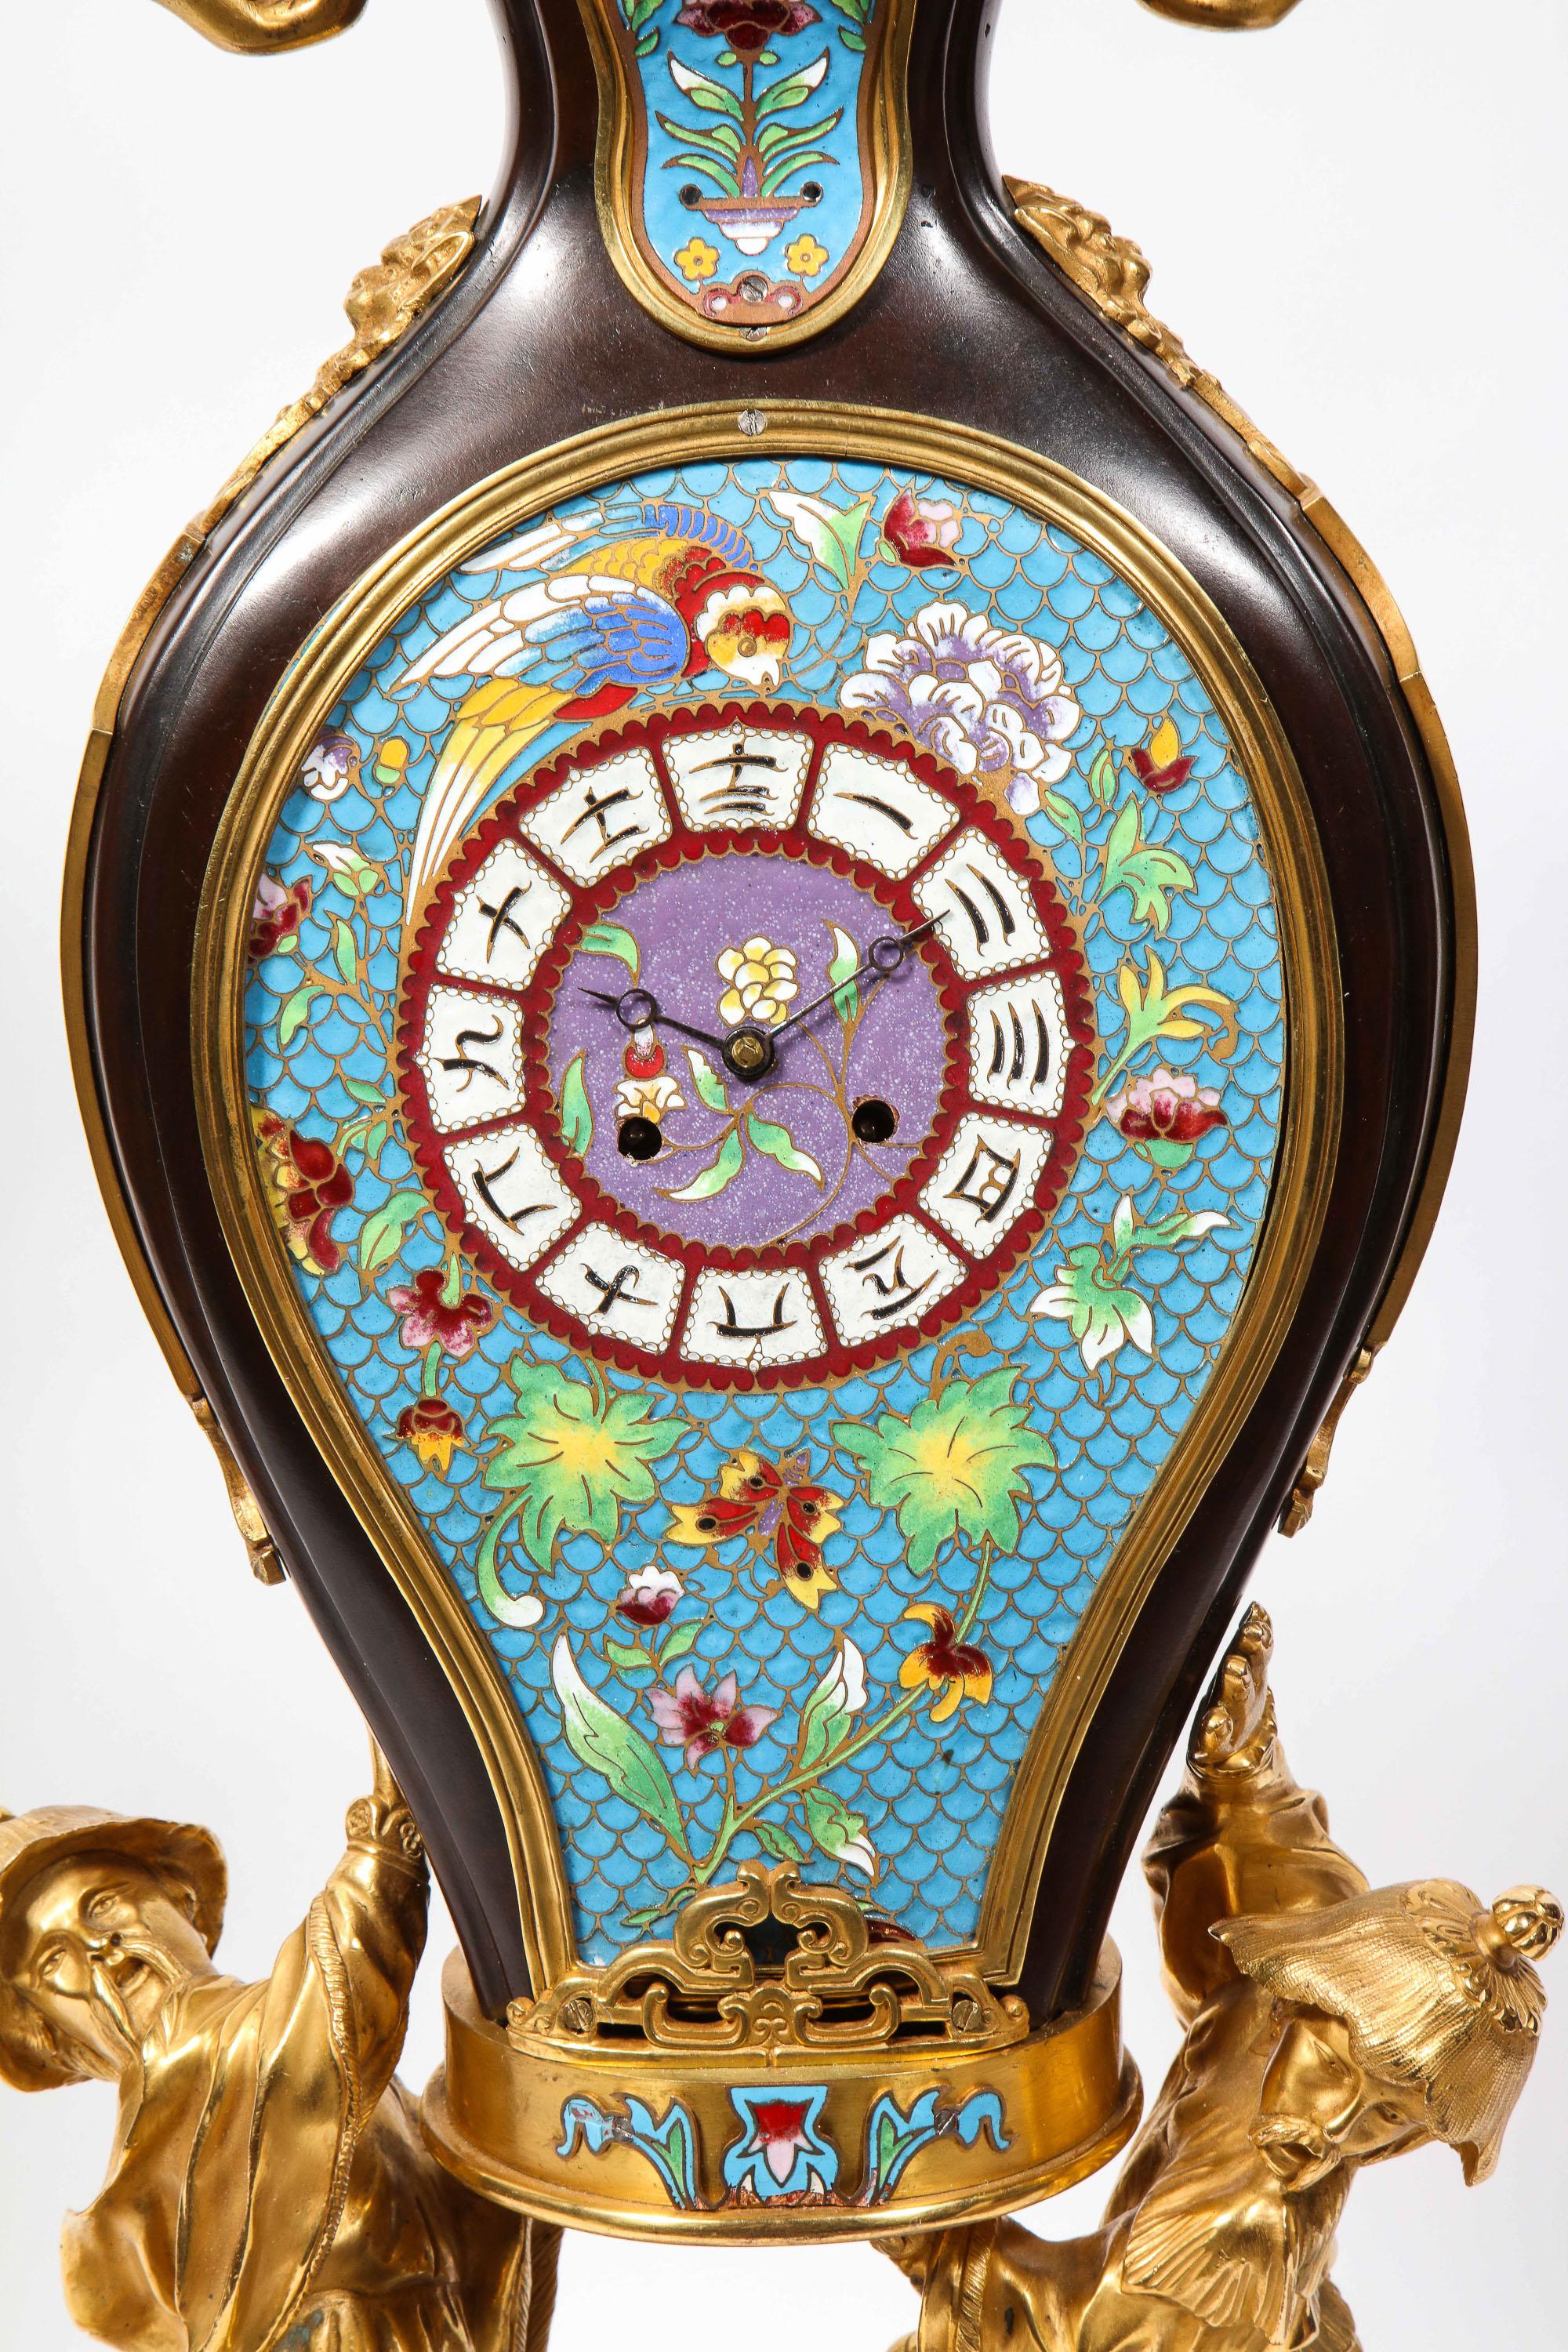 19th Century French Japonisme Ormolu, Patinated Bronze, and Cloisonne Enamel Mantel Clock For Sale